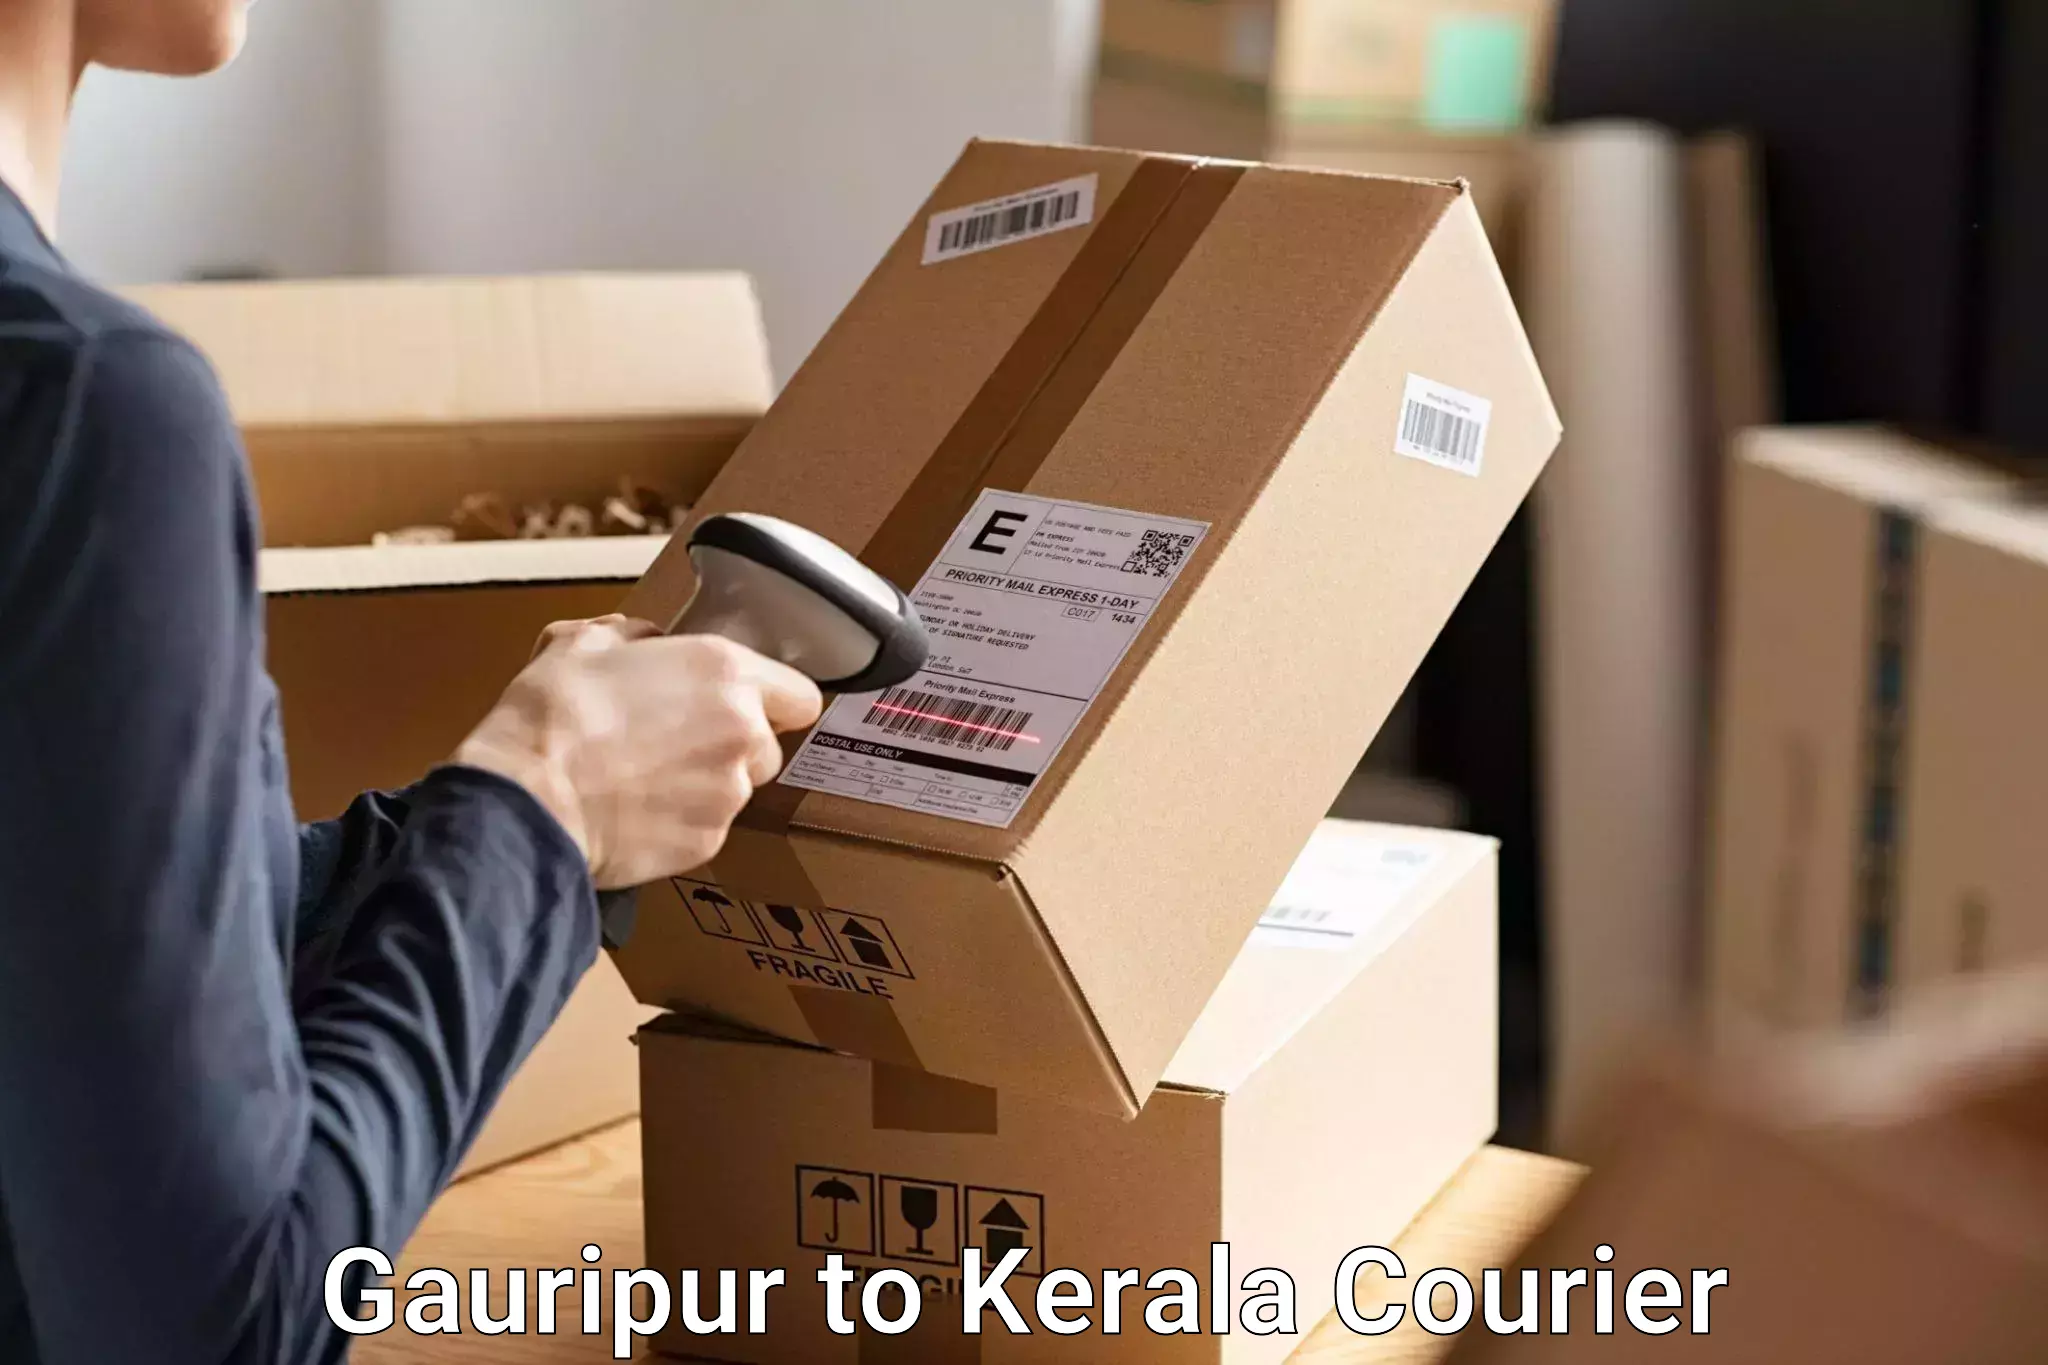 Luggage shipment specialists Gauripur to Kerala